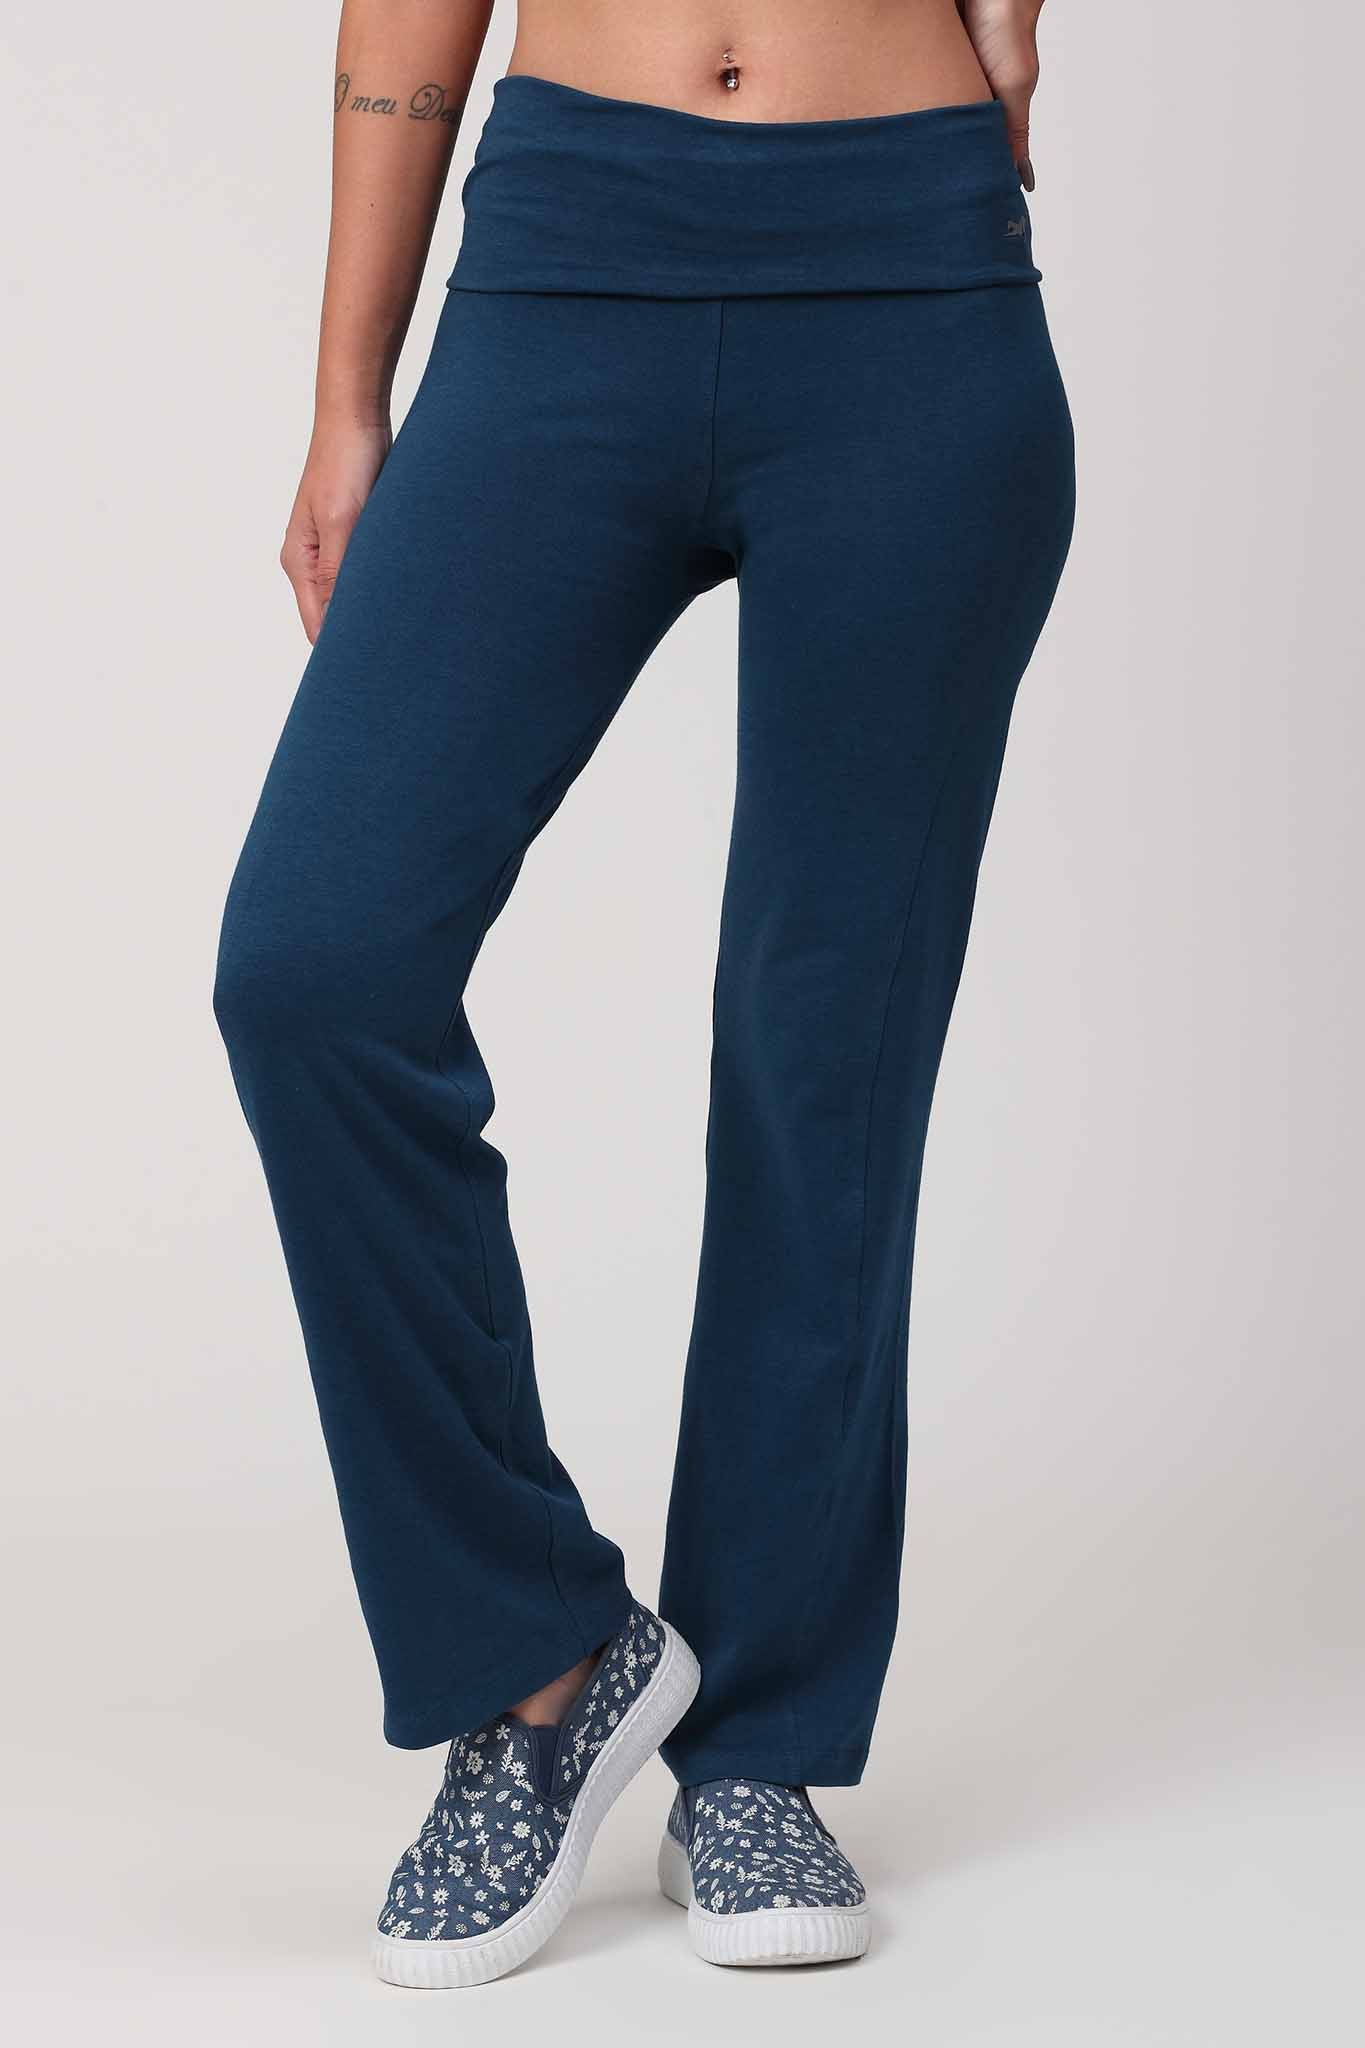 Womens Yoga Pants in Nabha - Dealers, Manufacturers & Suppliers